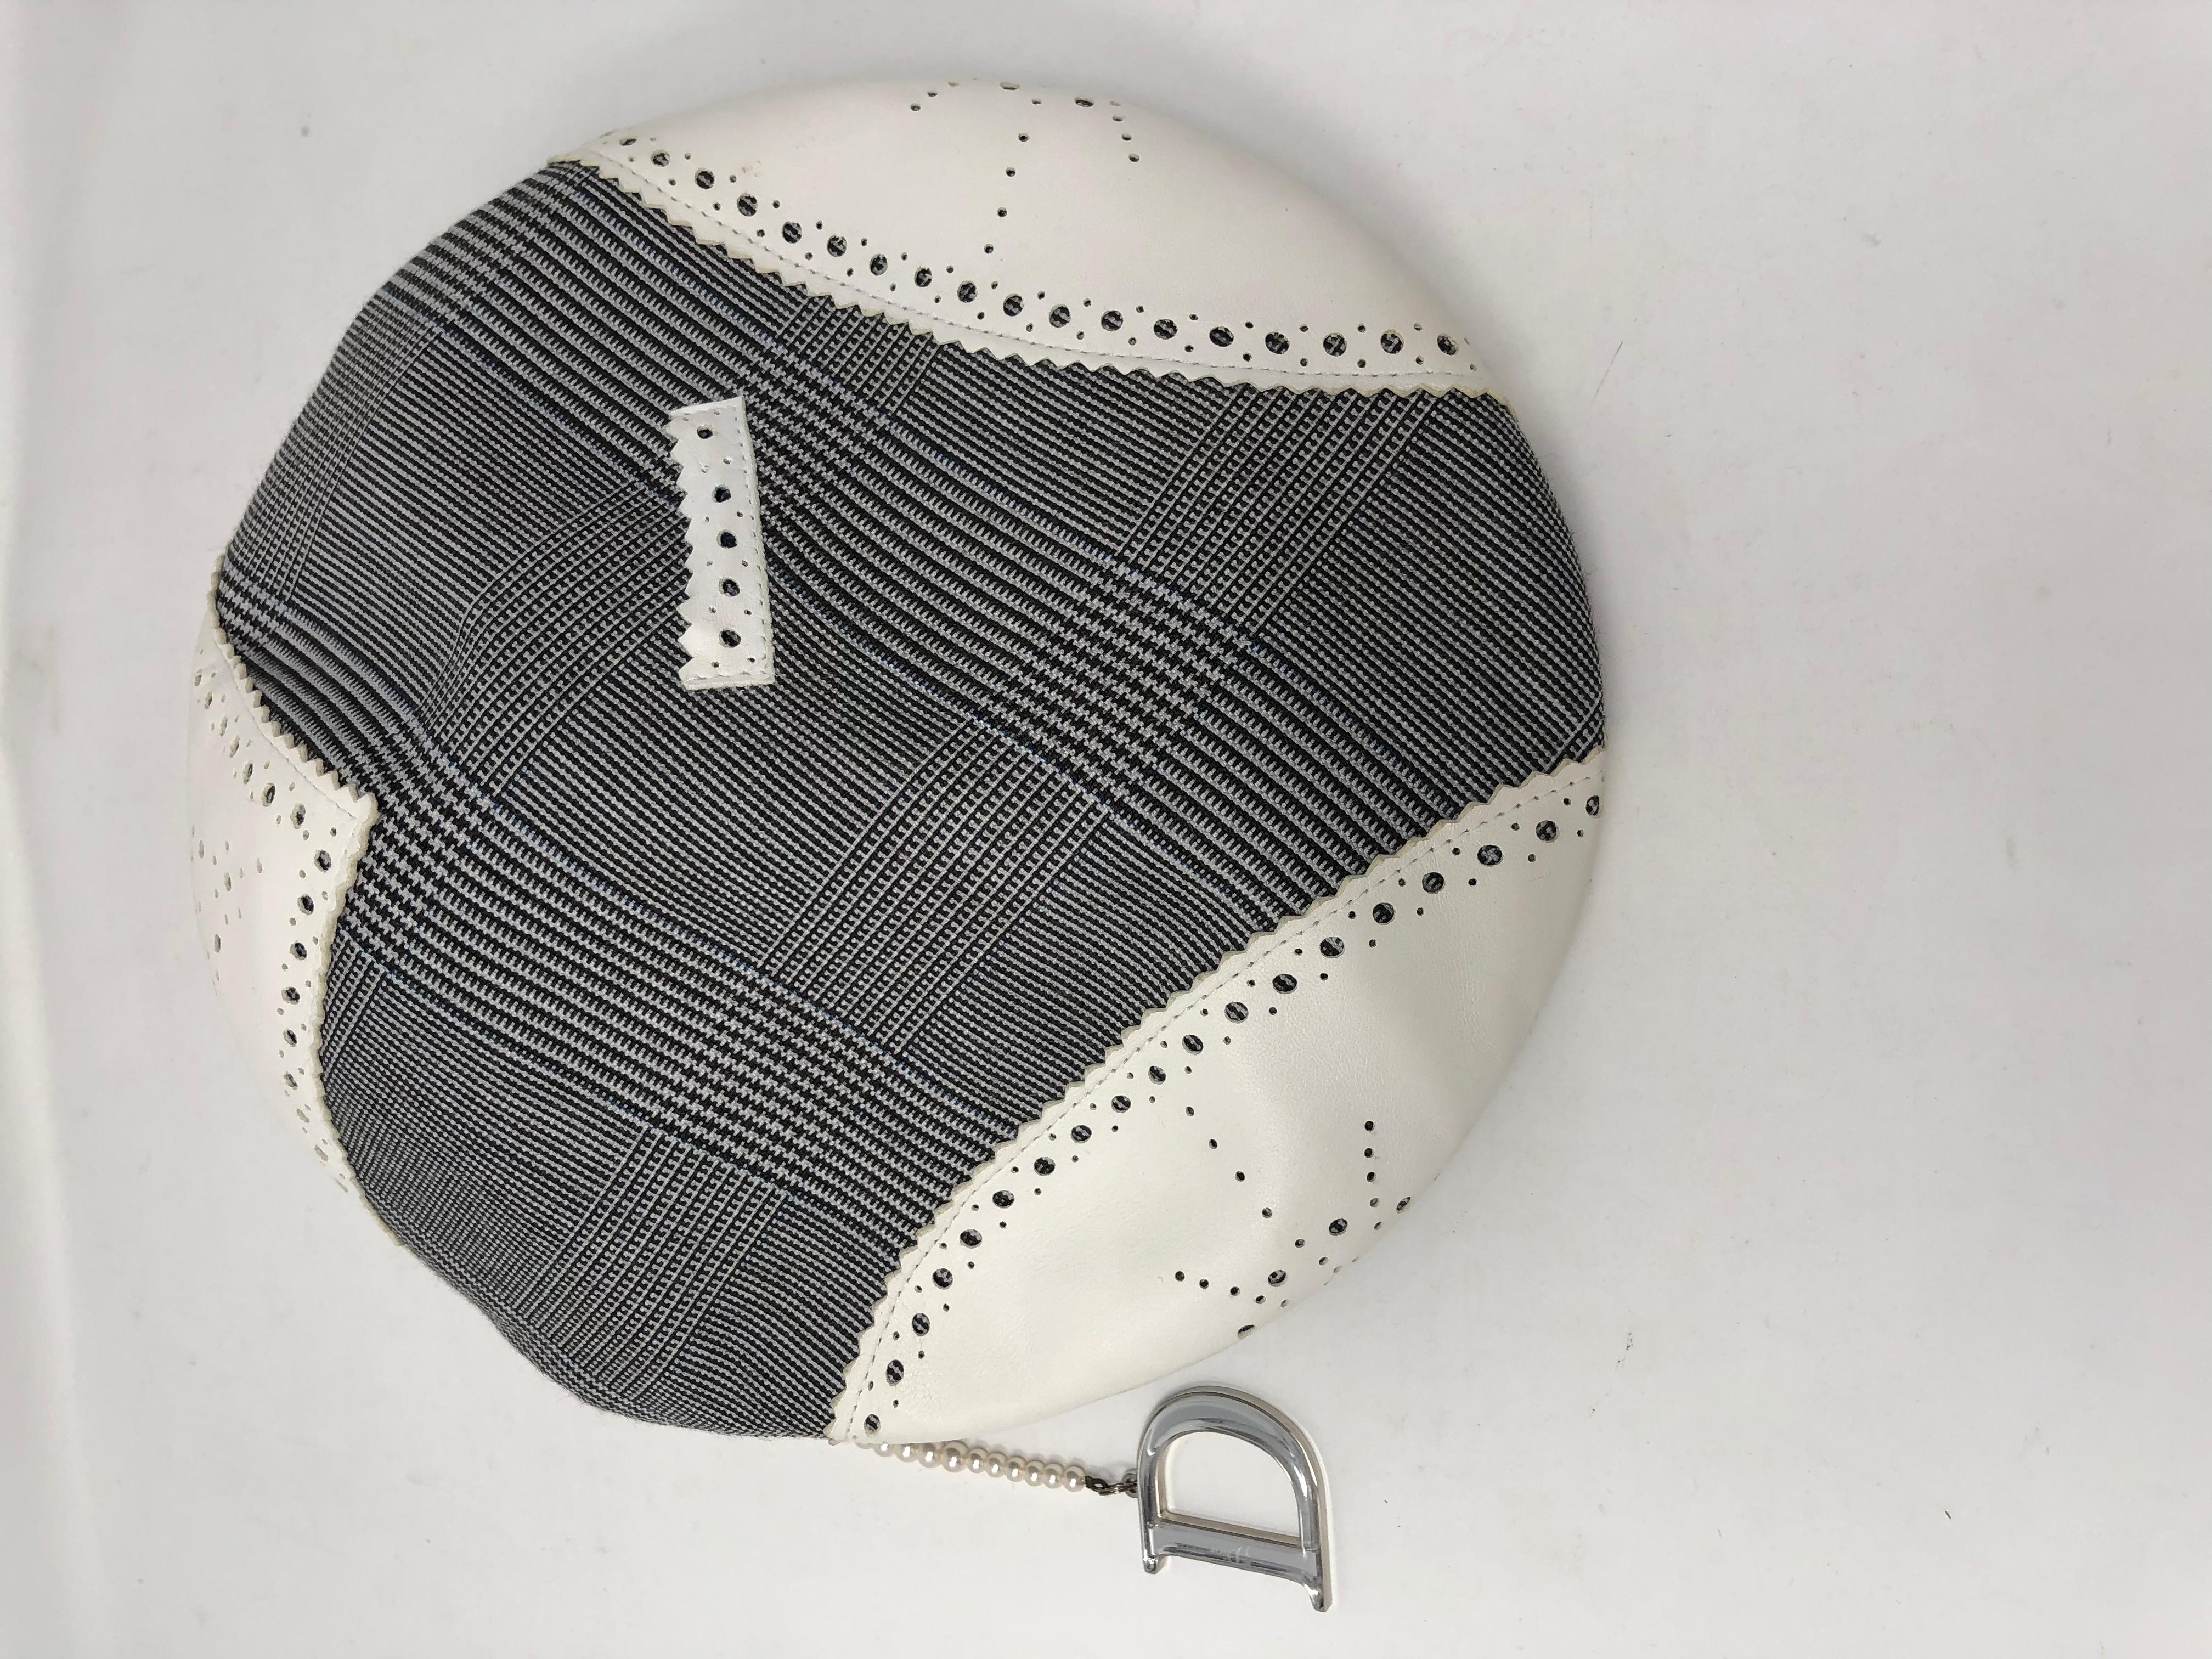 Christian Dior White Leather with perforated leather detail, newsboy flat cap
size: 57 